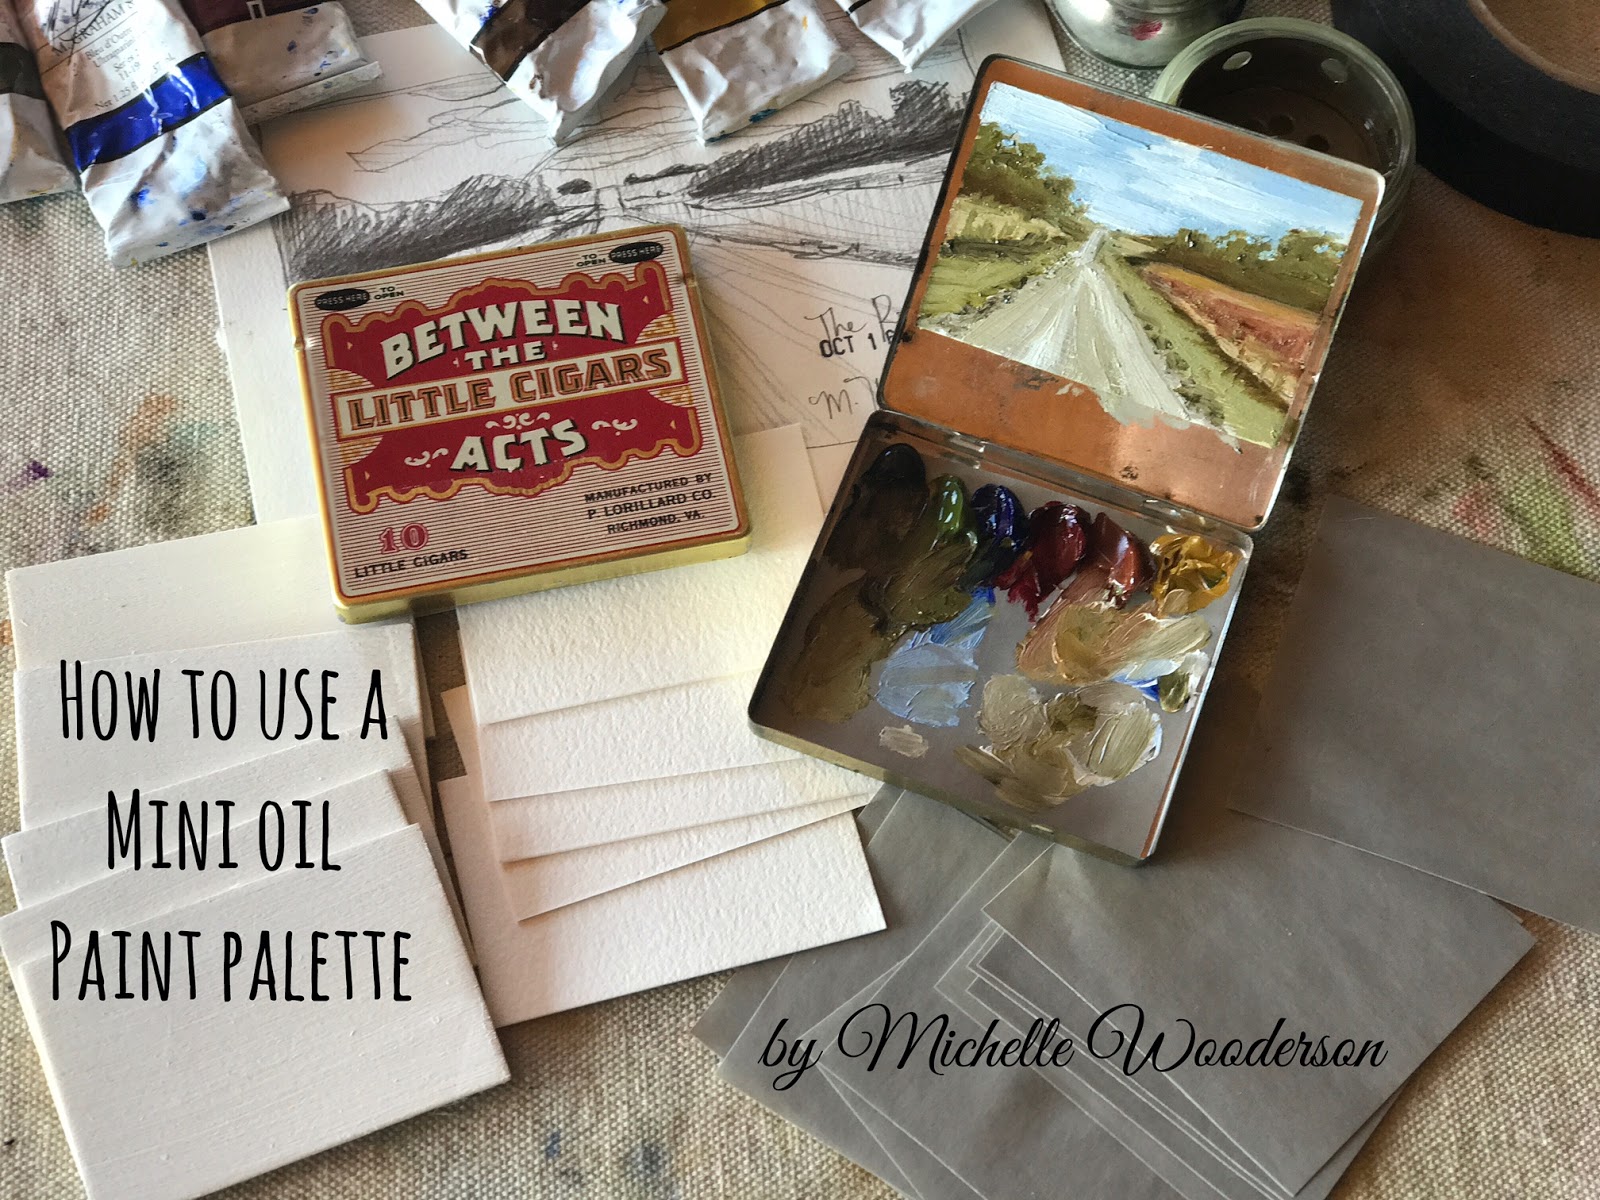 Mish Mash: How to use a mini oil paint palette